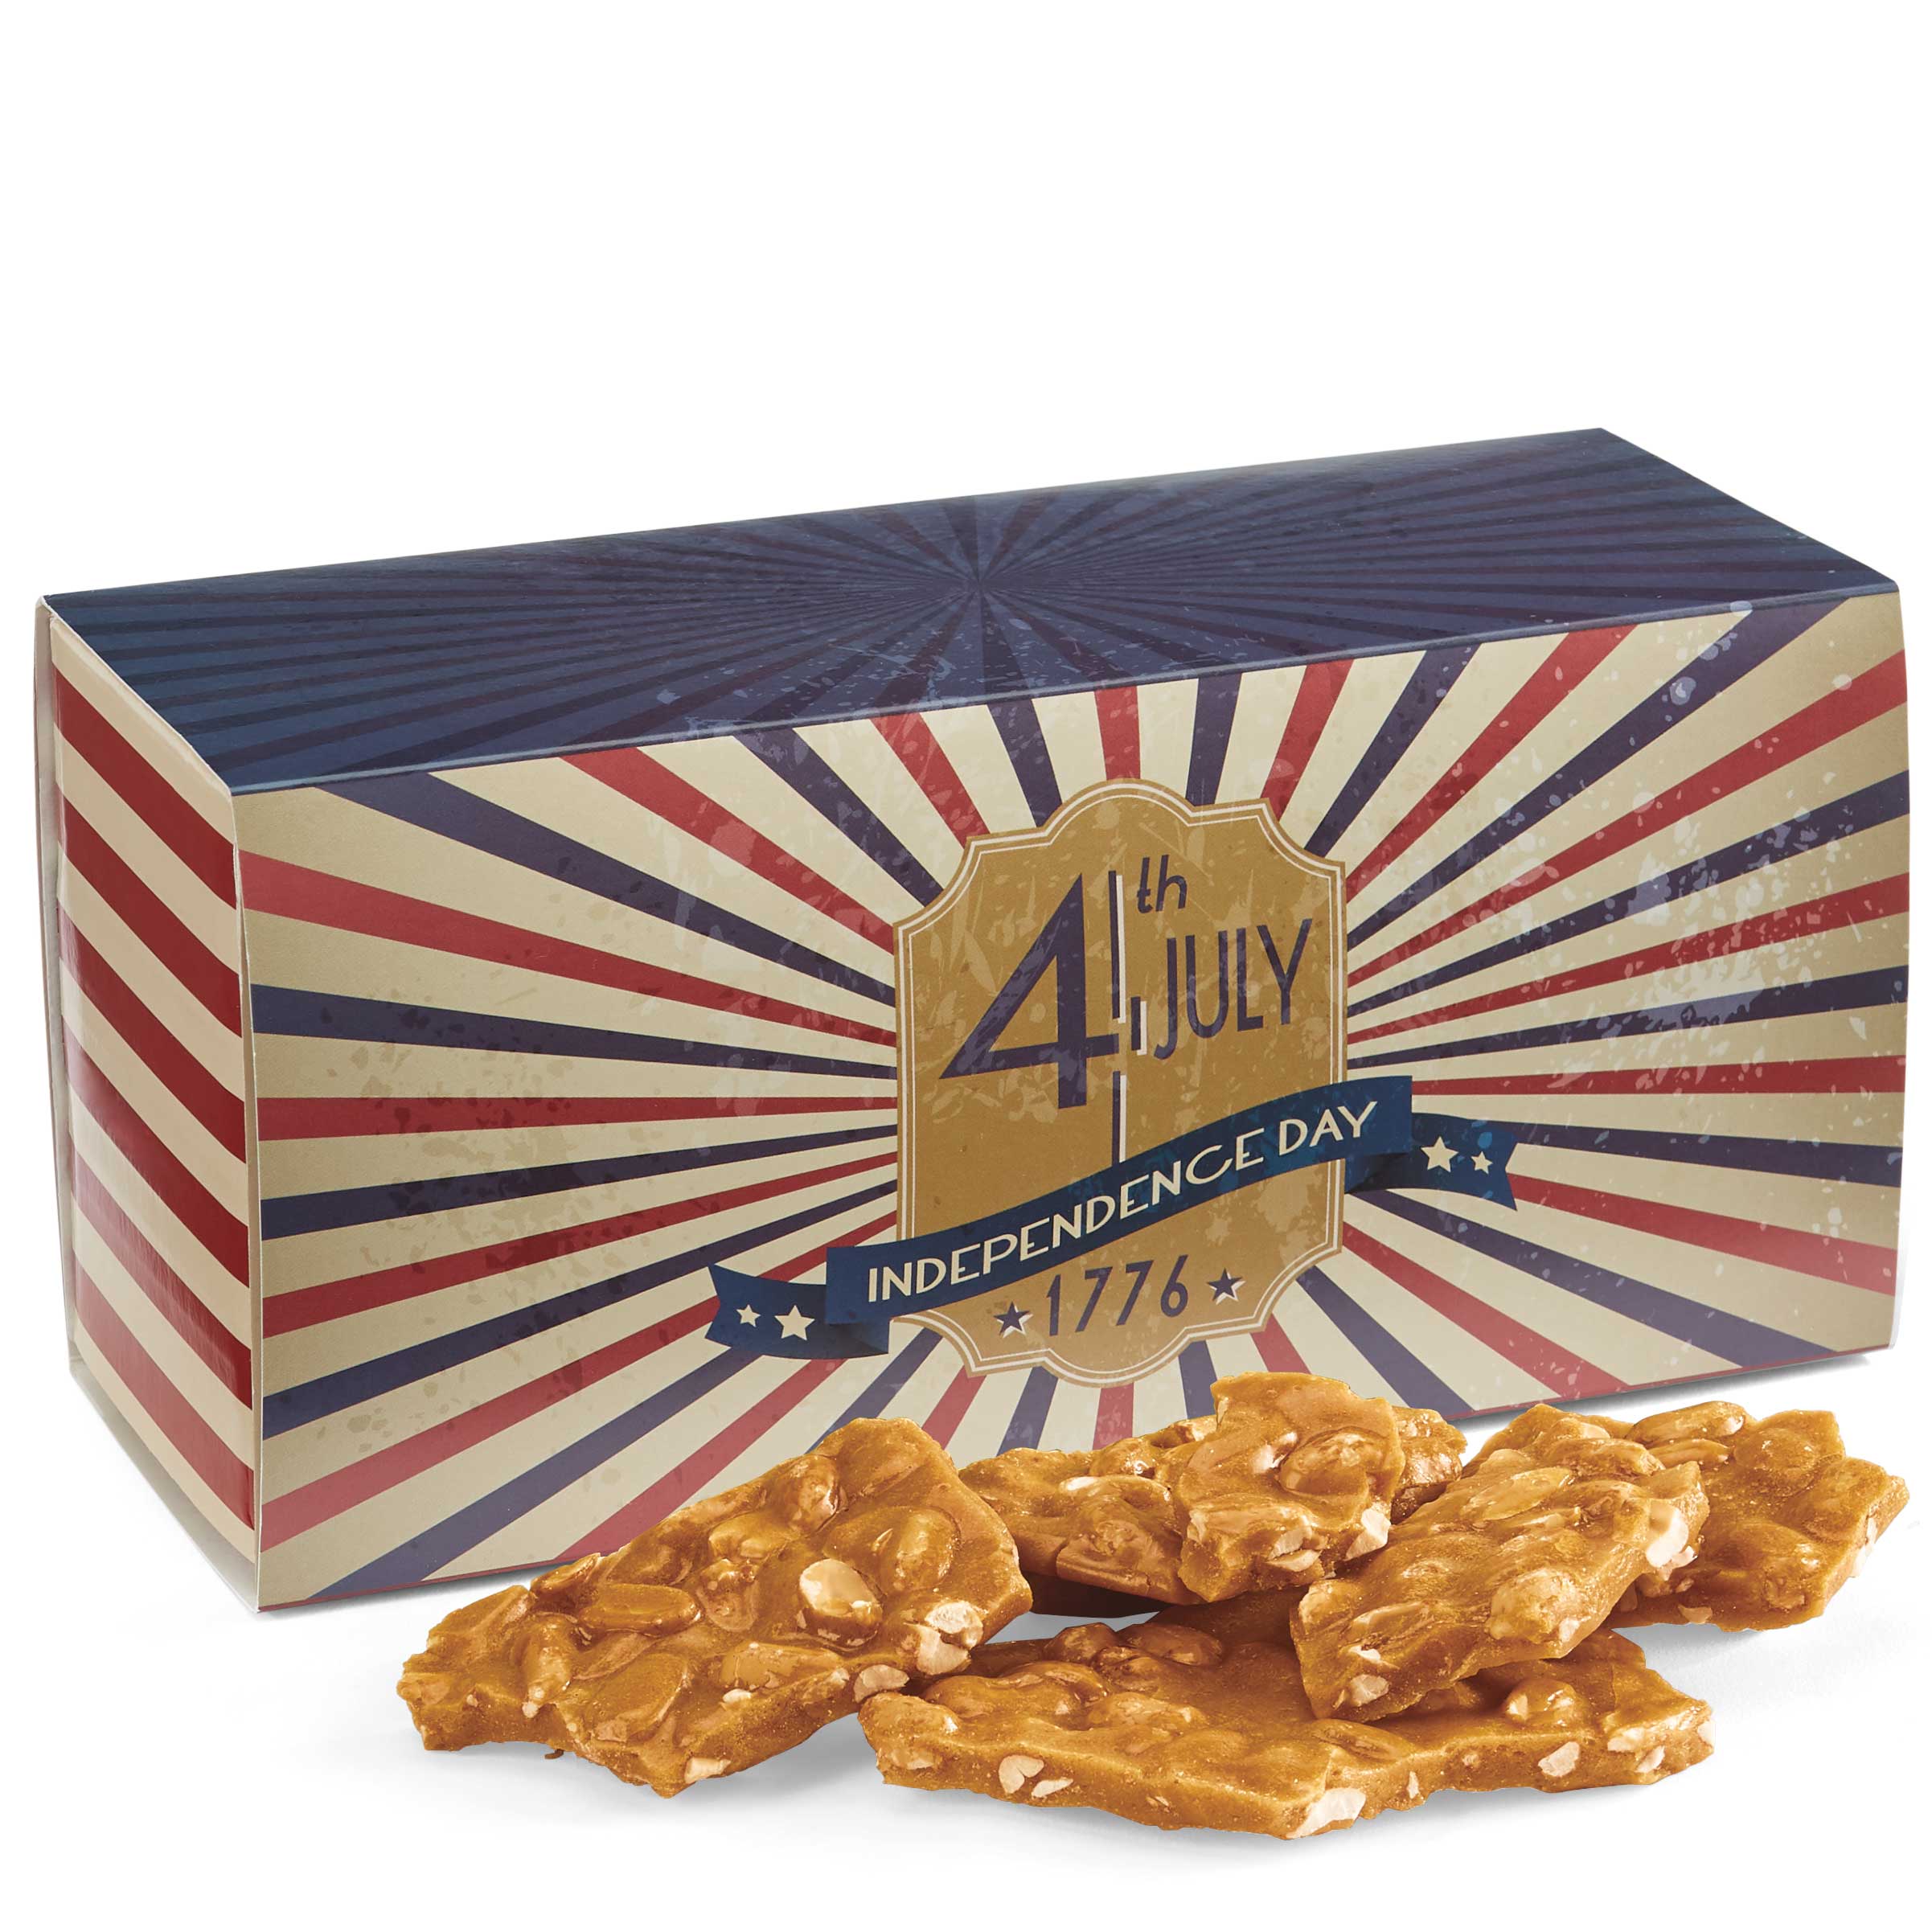 Old Fashioned Peanut Brittle in the 4th of July Gift Box